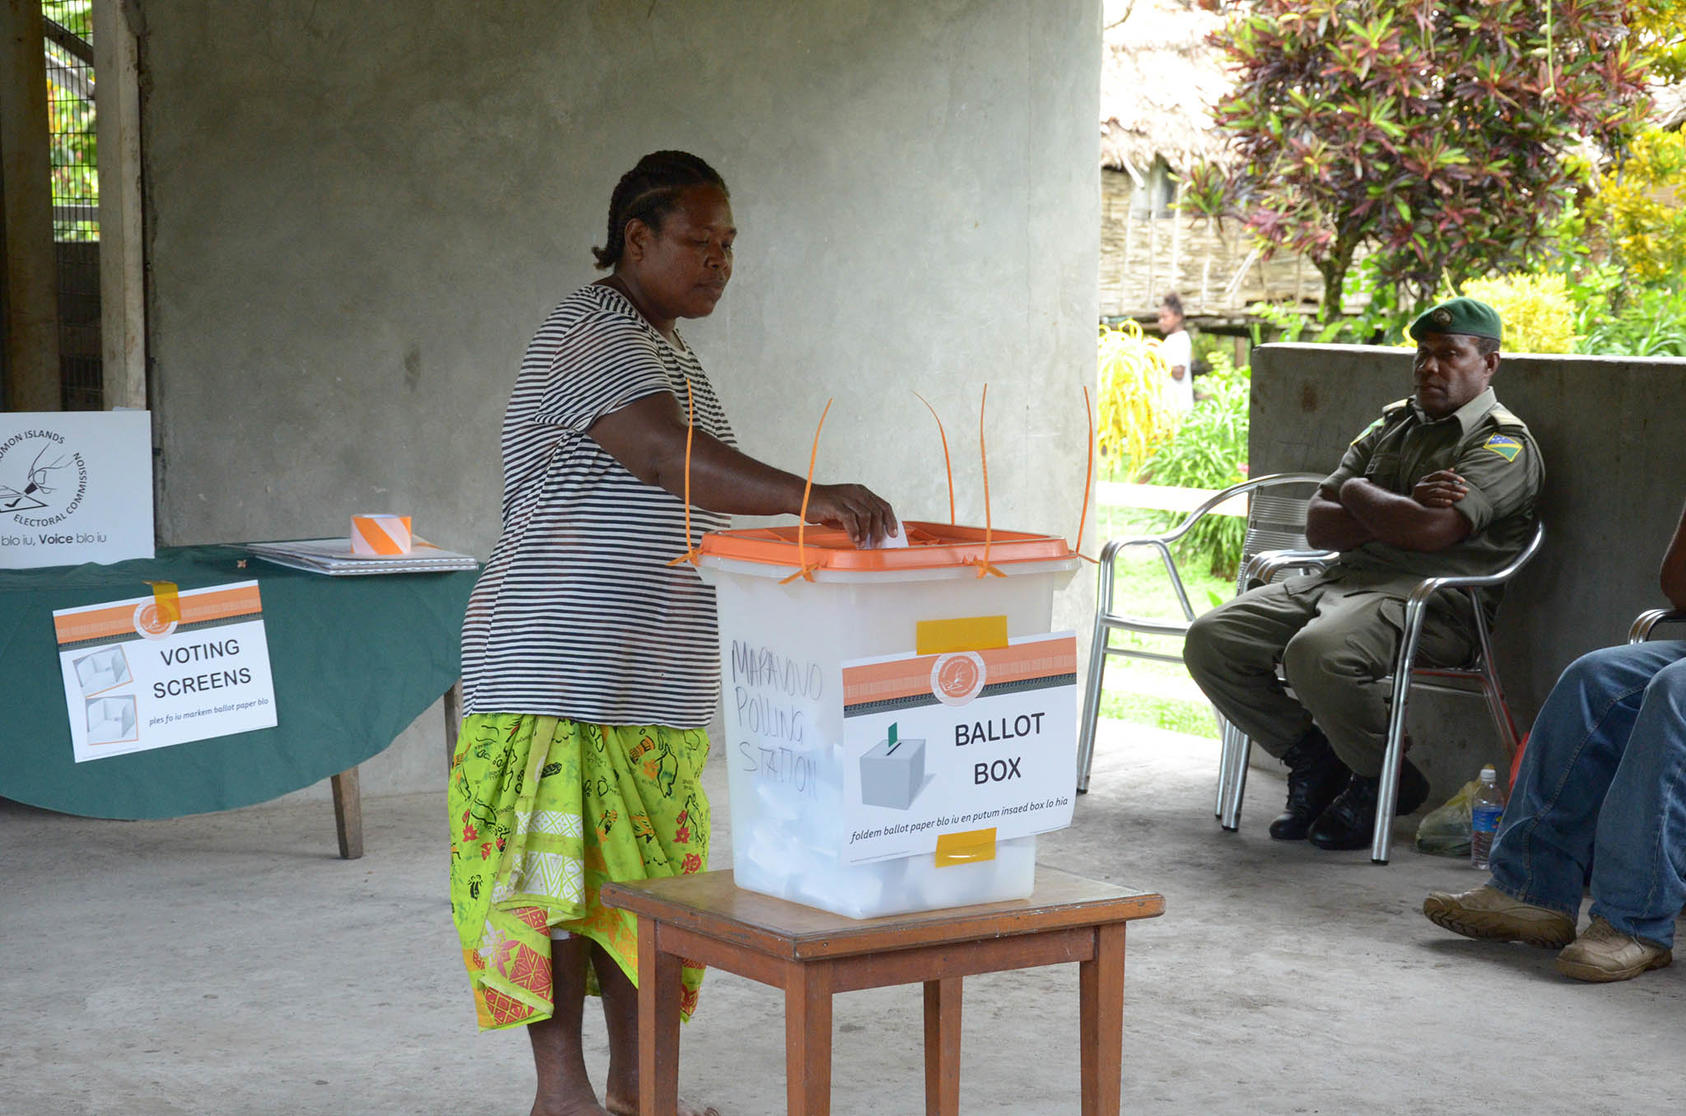 A woman votes in the 2019 Solomon Islands parliamentary elections. April 3, 2019. (Commonwealth Secretariat/Flickr)